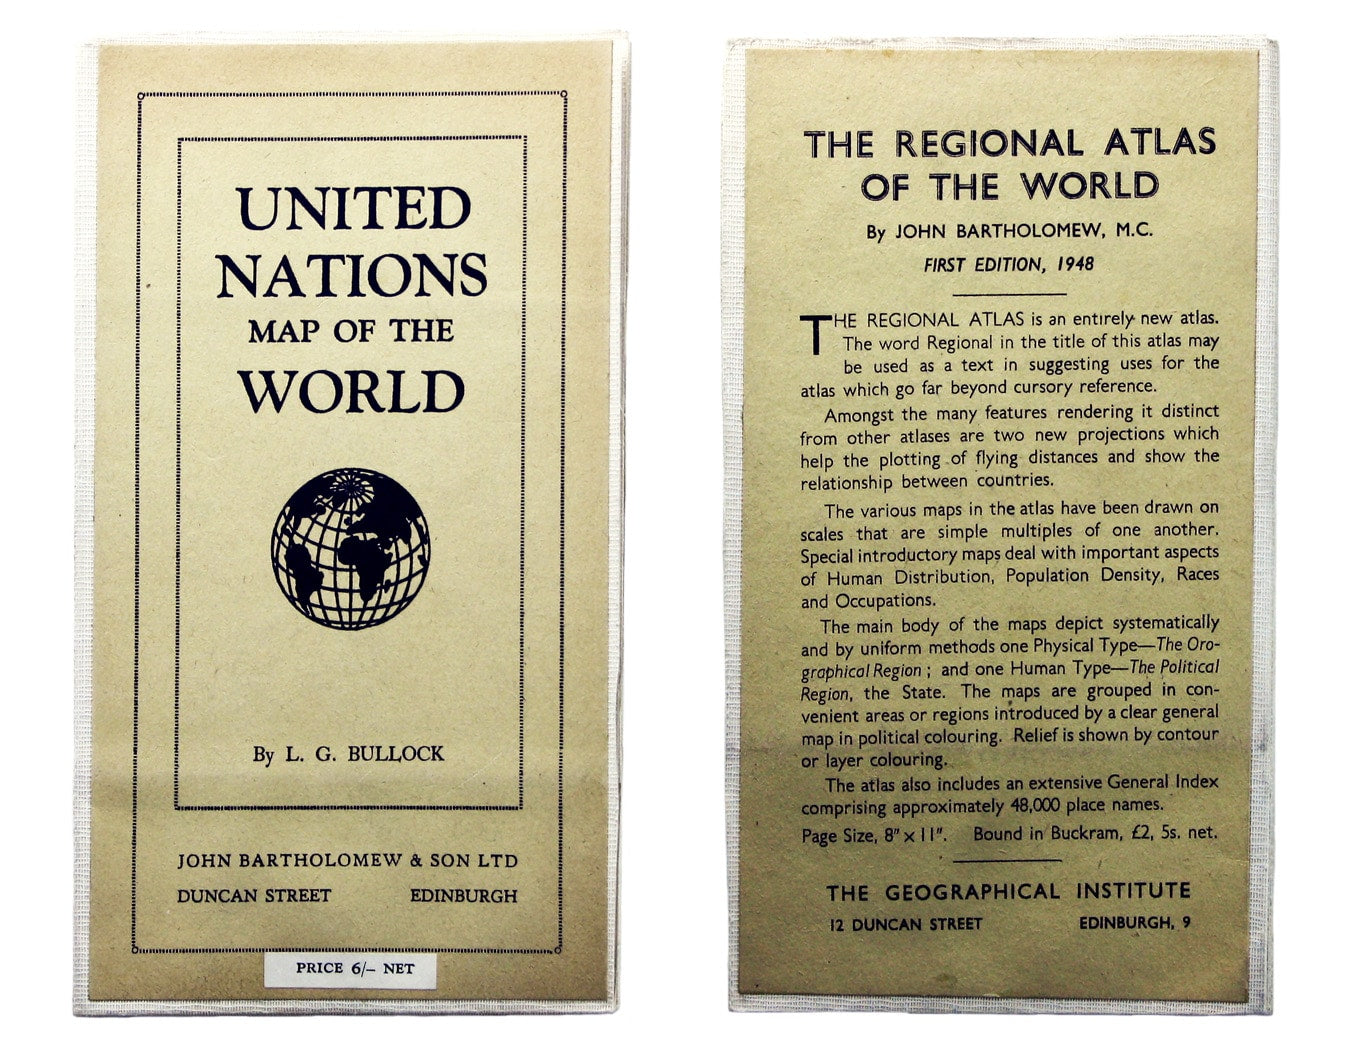 Bullock’s United Nations Map of the World